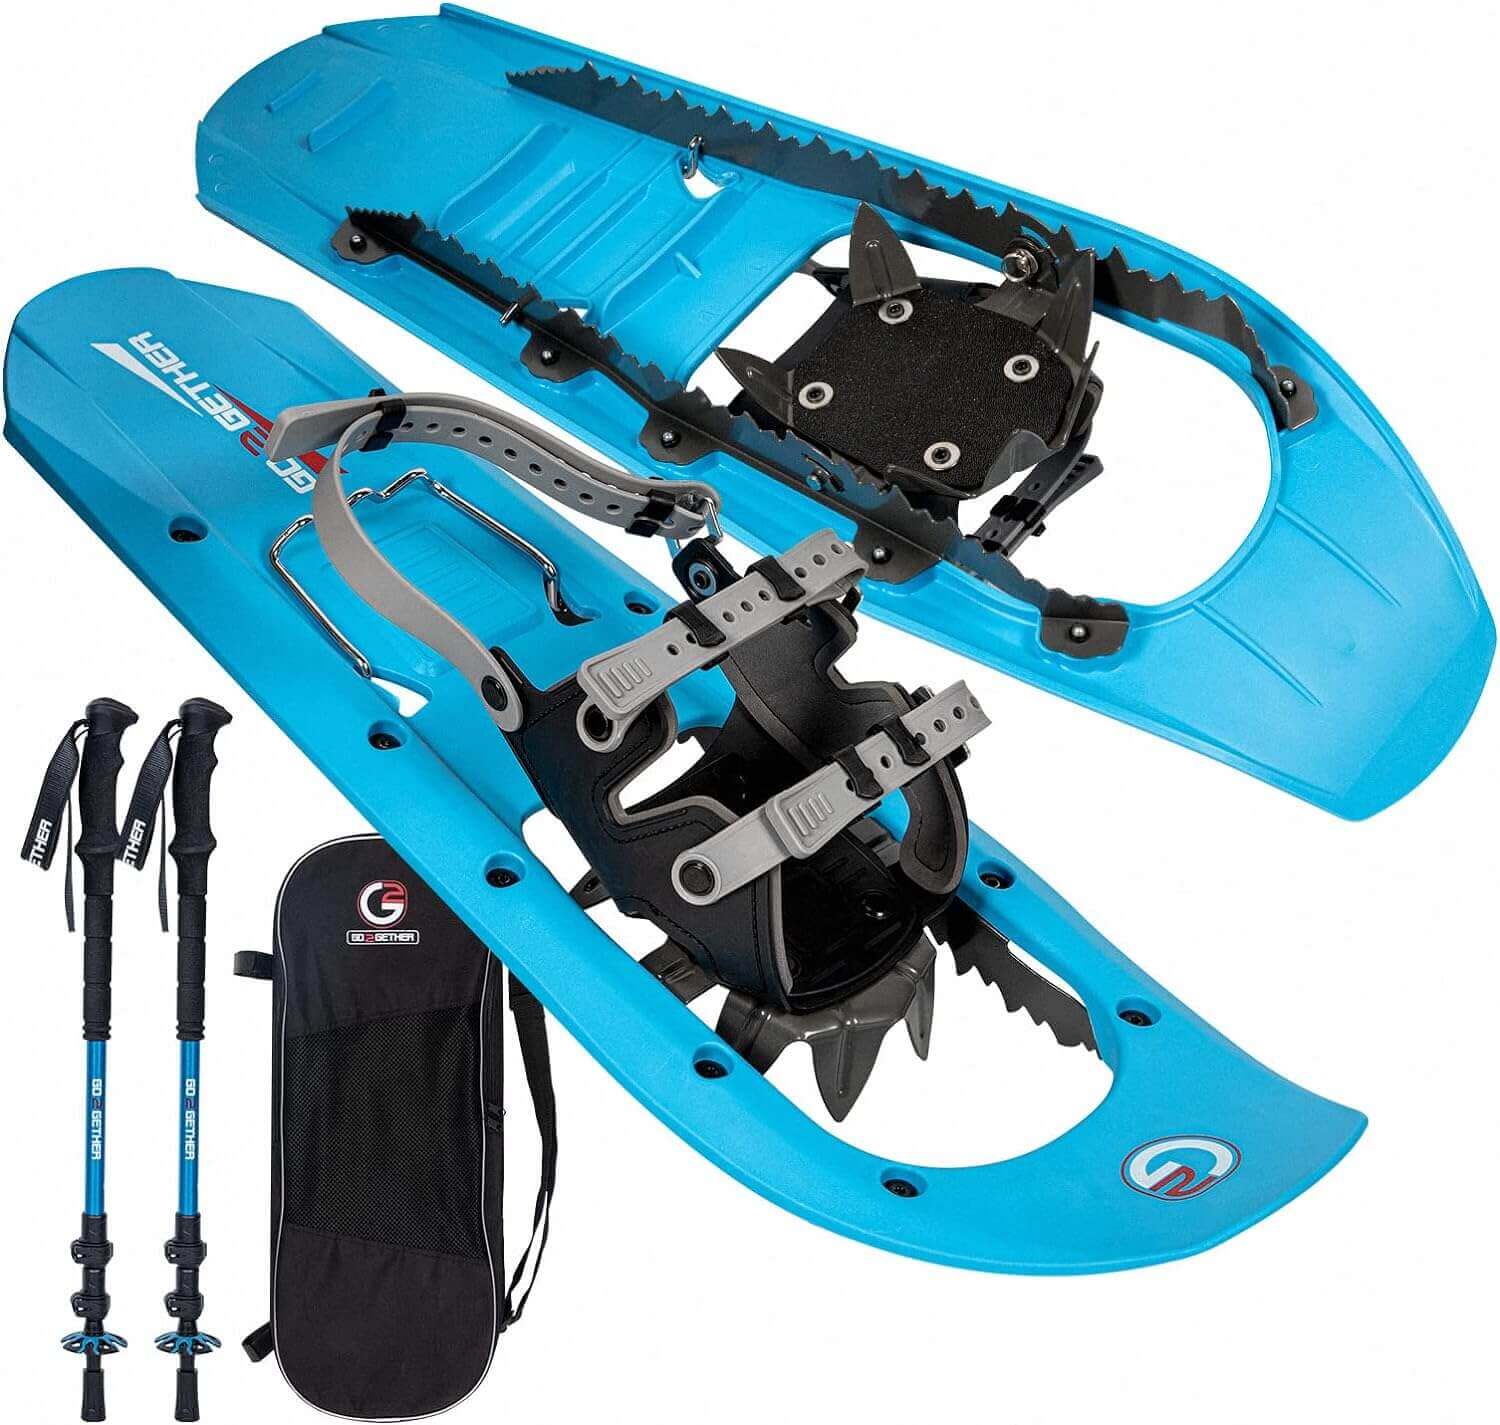 Shop The Latest >G2 Mountain Terrain Snowshoes with Trekking Poles Set > *Only $118.99*> From The Top Brand > *G2 GO2GETHERl* > Shop Now and Get Free Shipping On Orders Over $45.00 >*Shop Earth Foot*